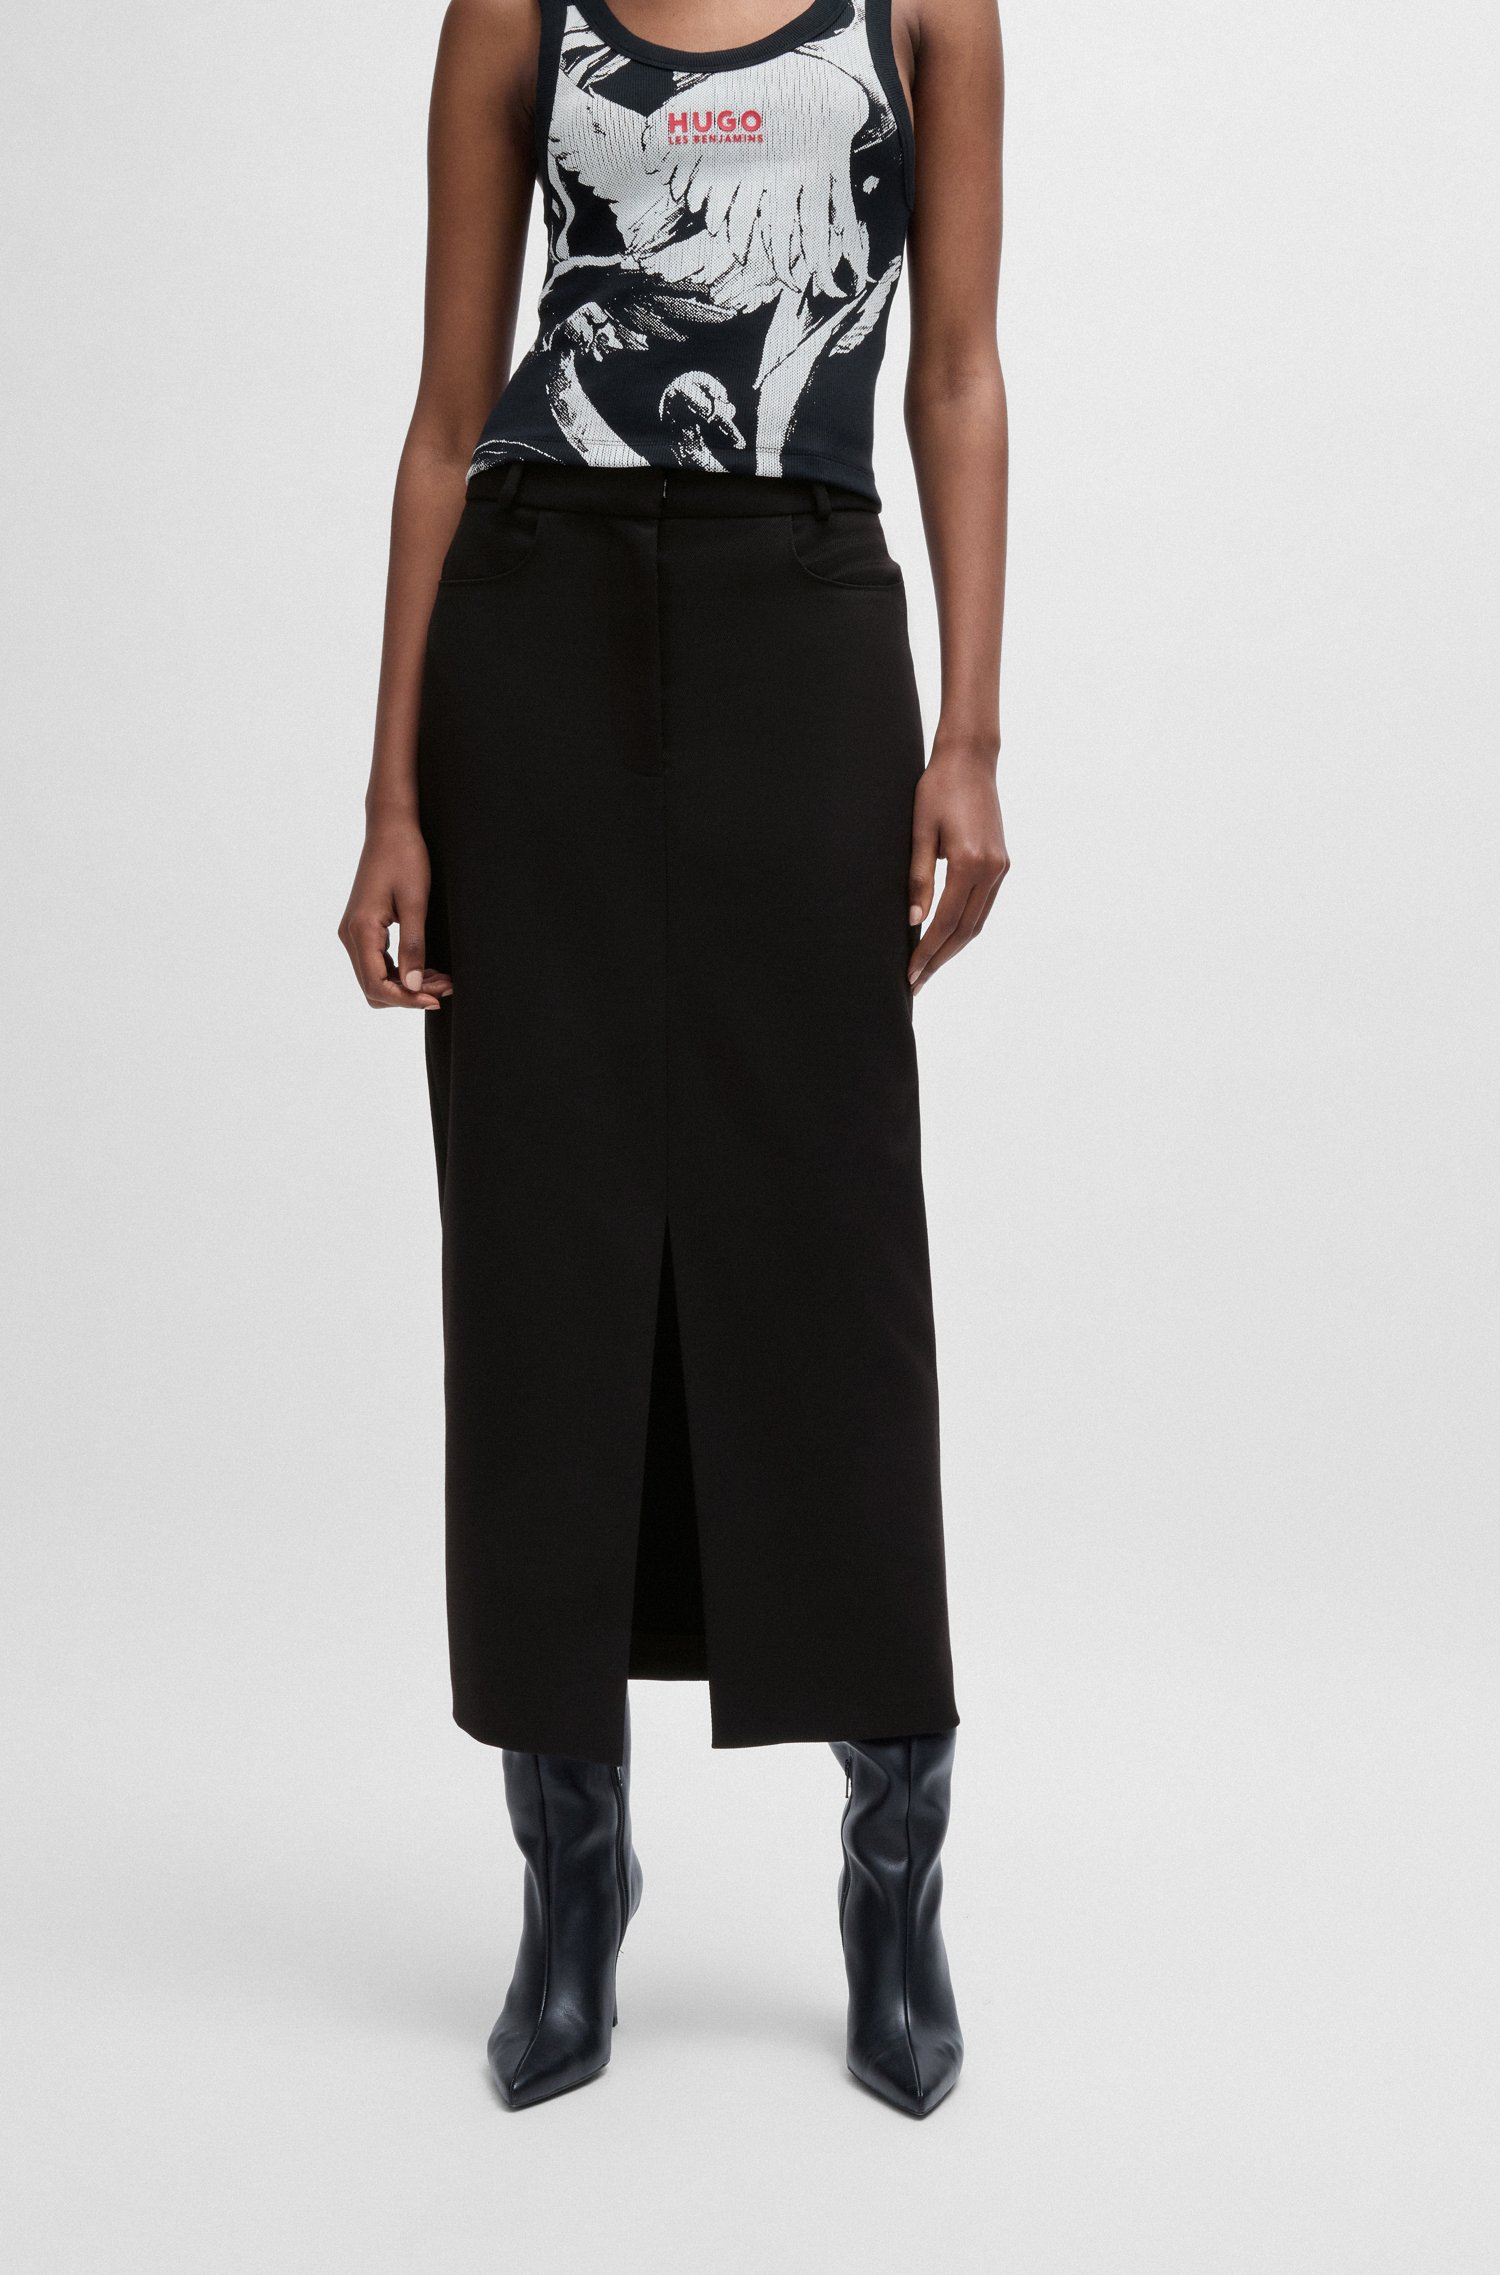 Maxi skirt with high front slit stretch fabric